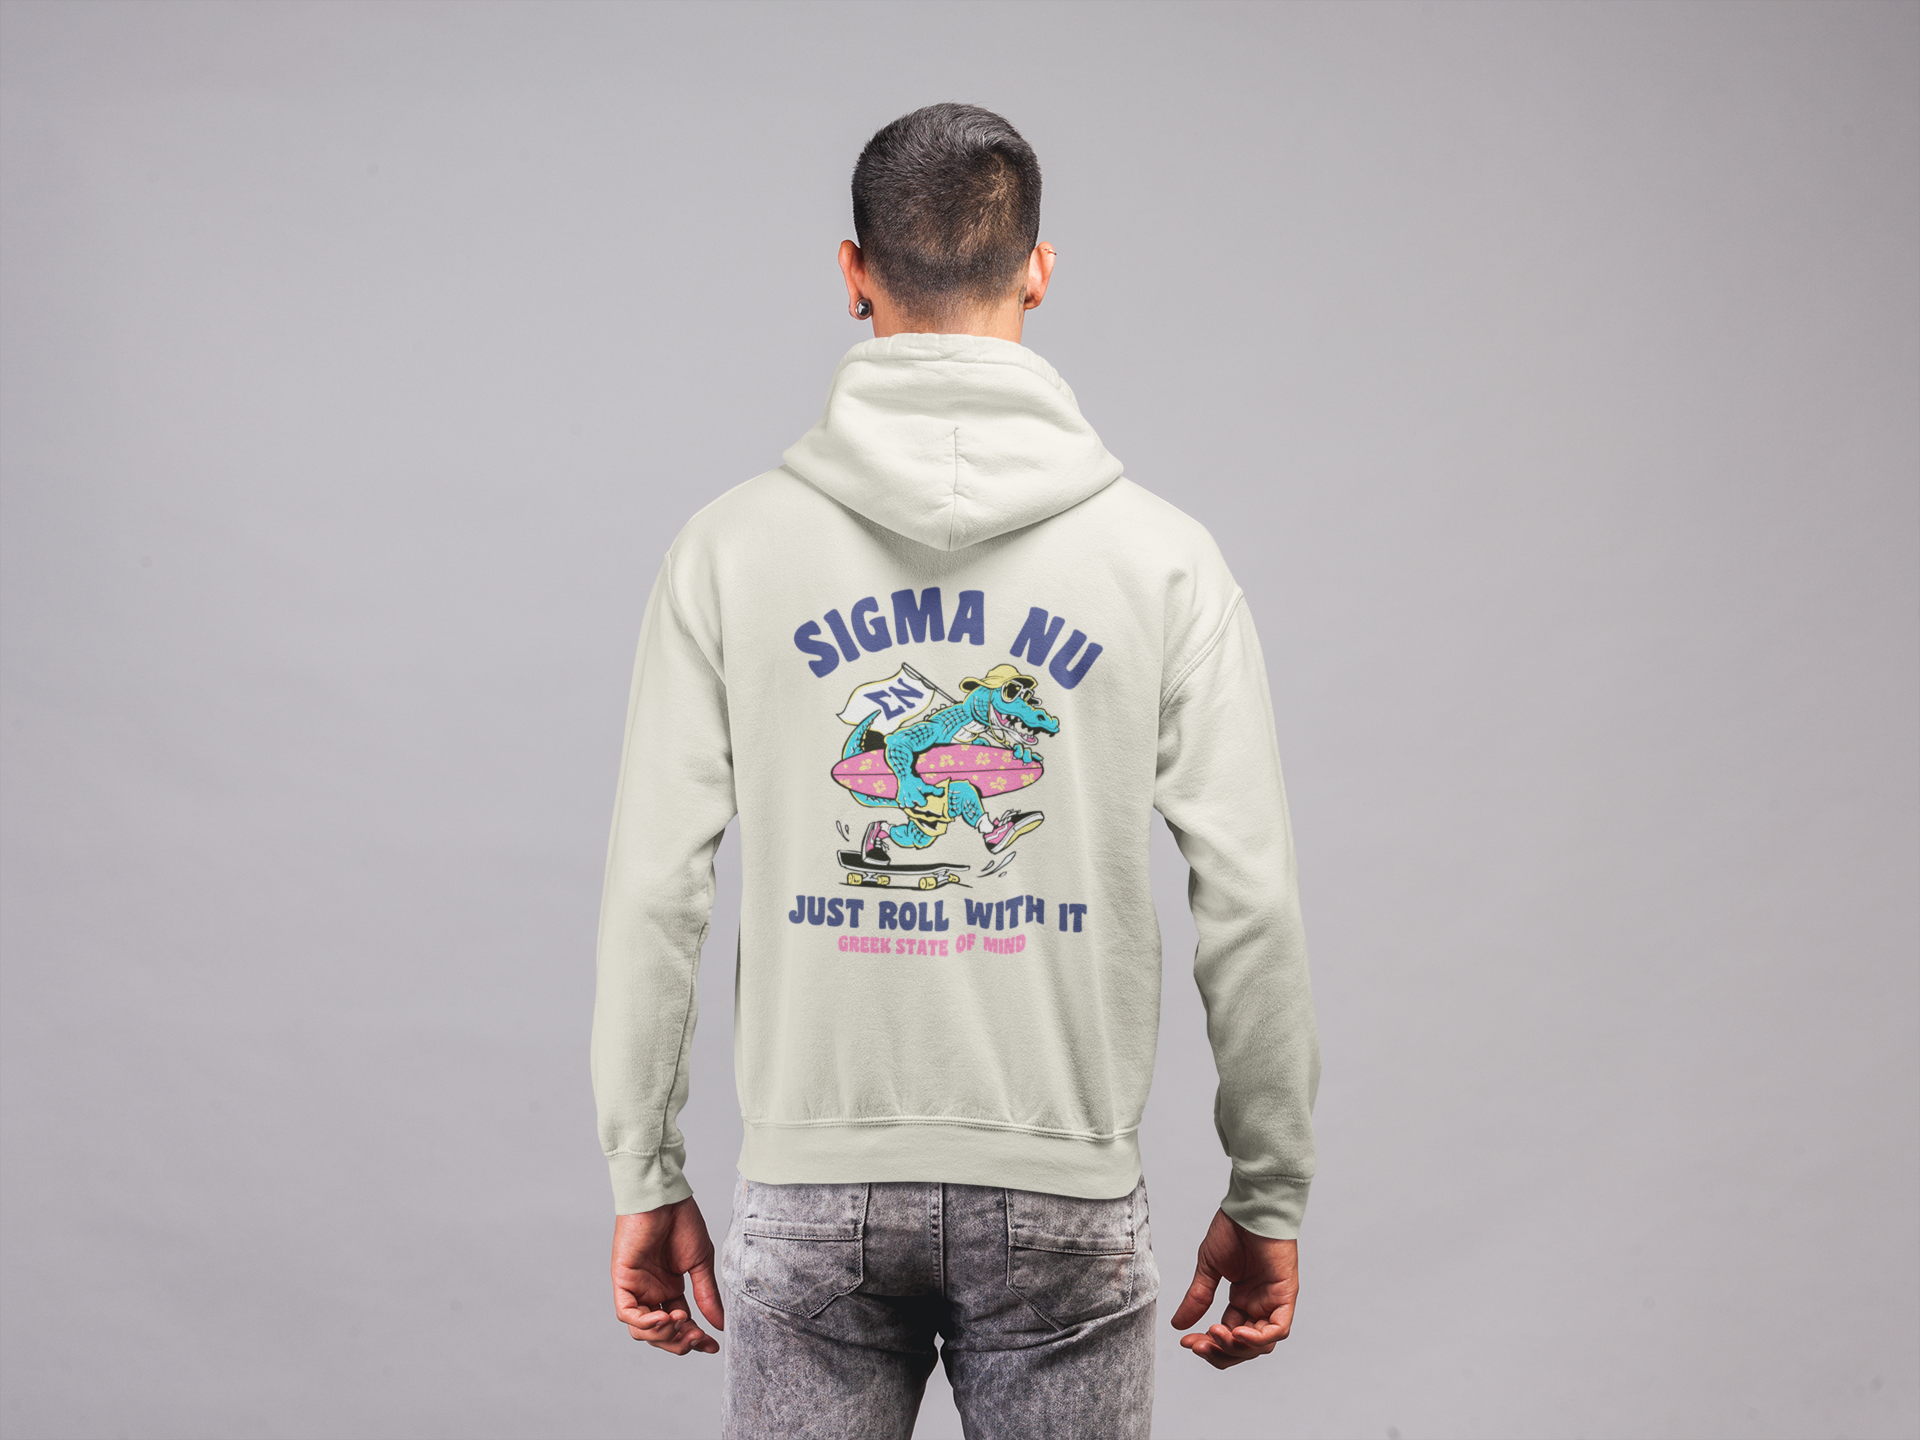 White Sigma Nu Graphic Hoodie | Alligator Skater | Sigma Nu Clothing, Apparel and Merchandise back model 